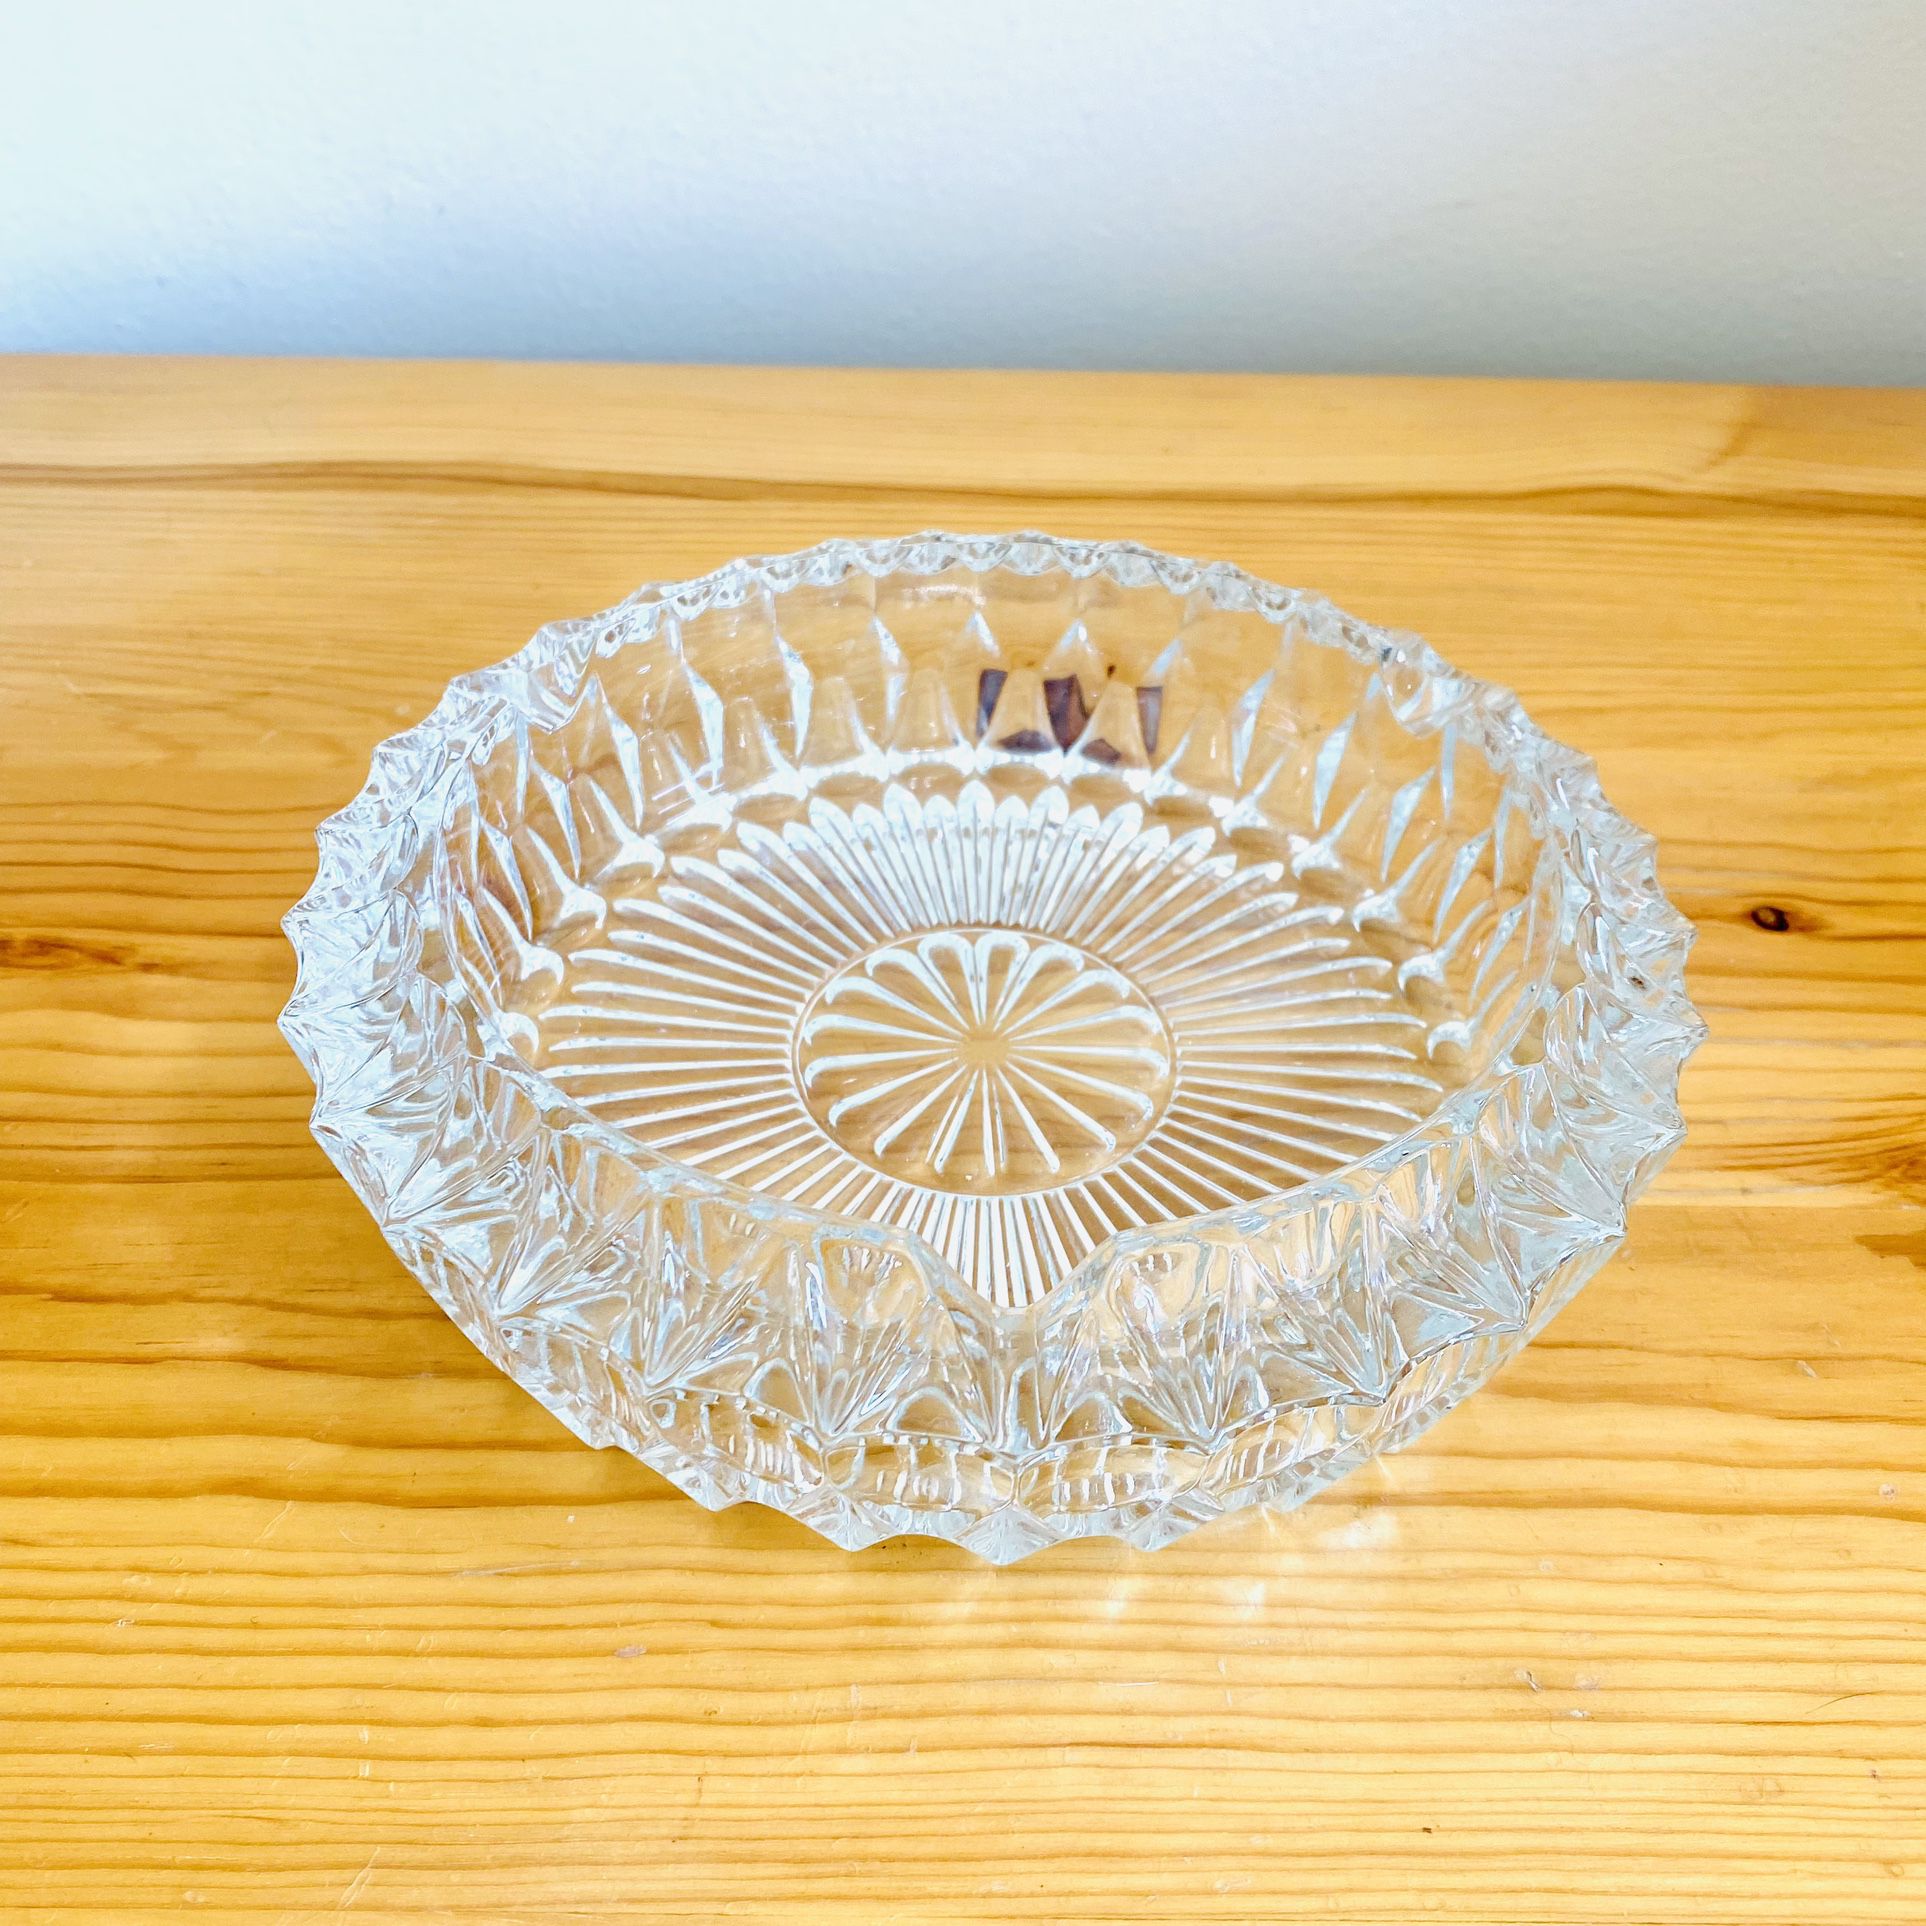 Vintage 1960s Glassware Ash Tray Clear Crystal Glass 60s